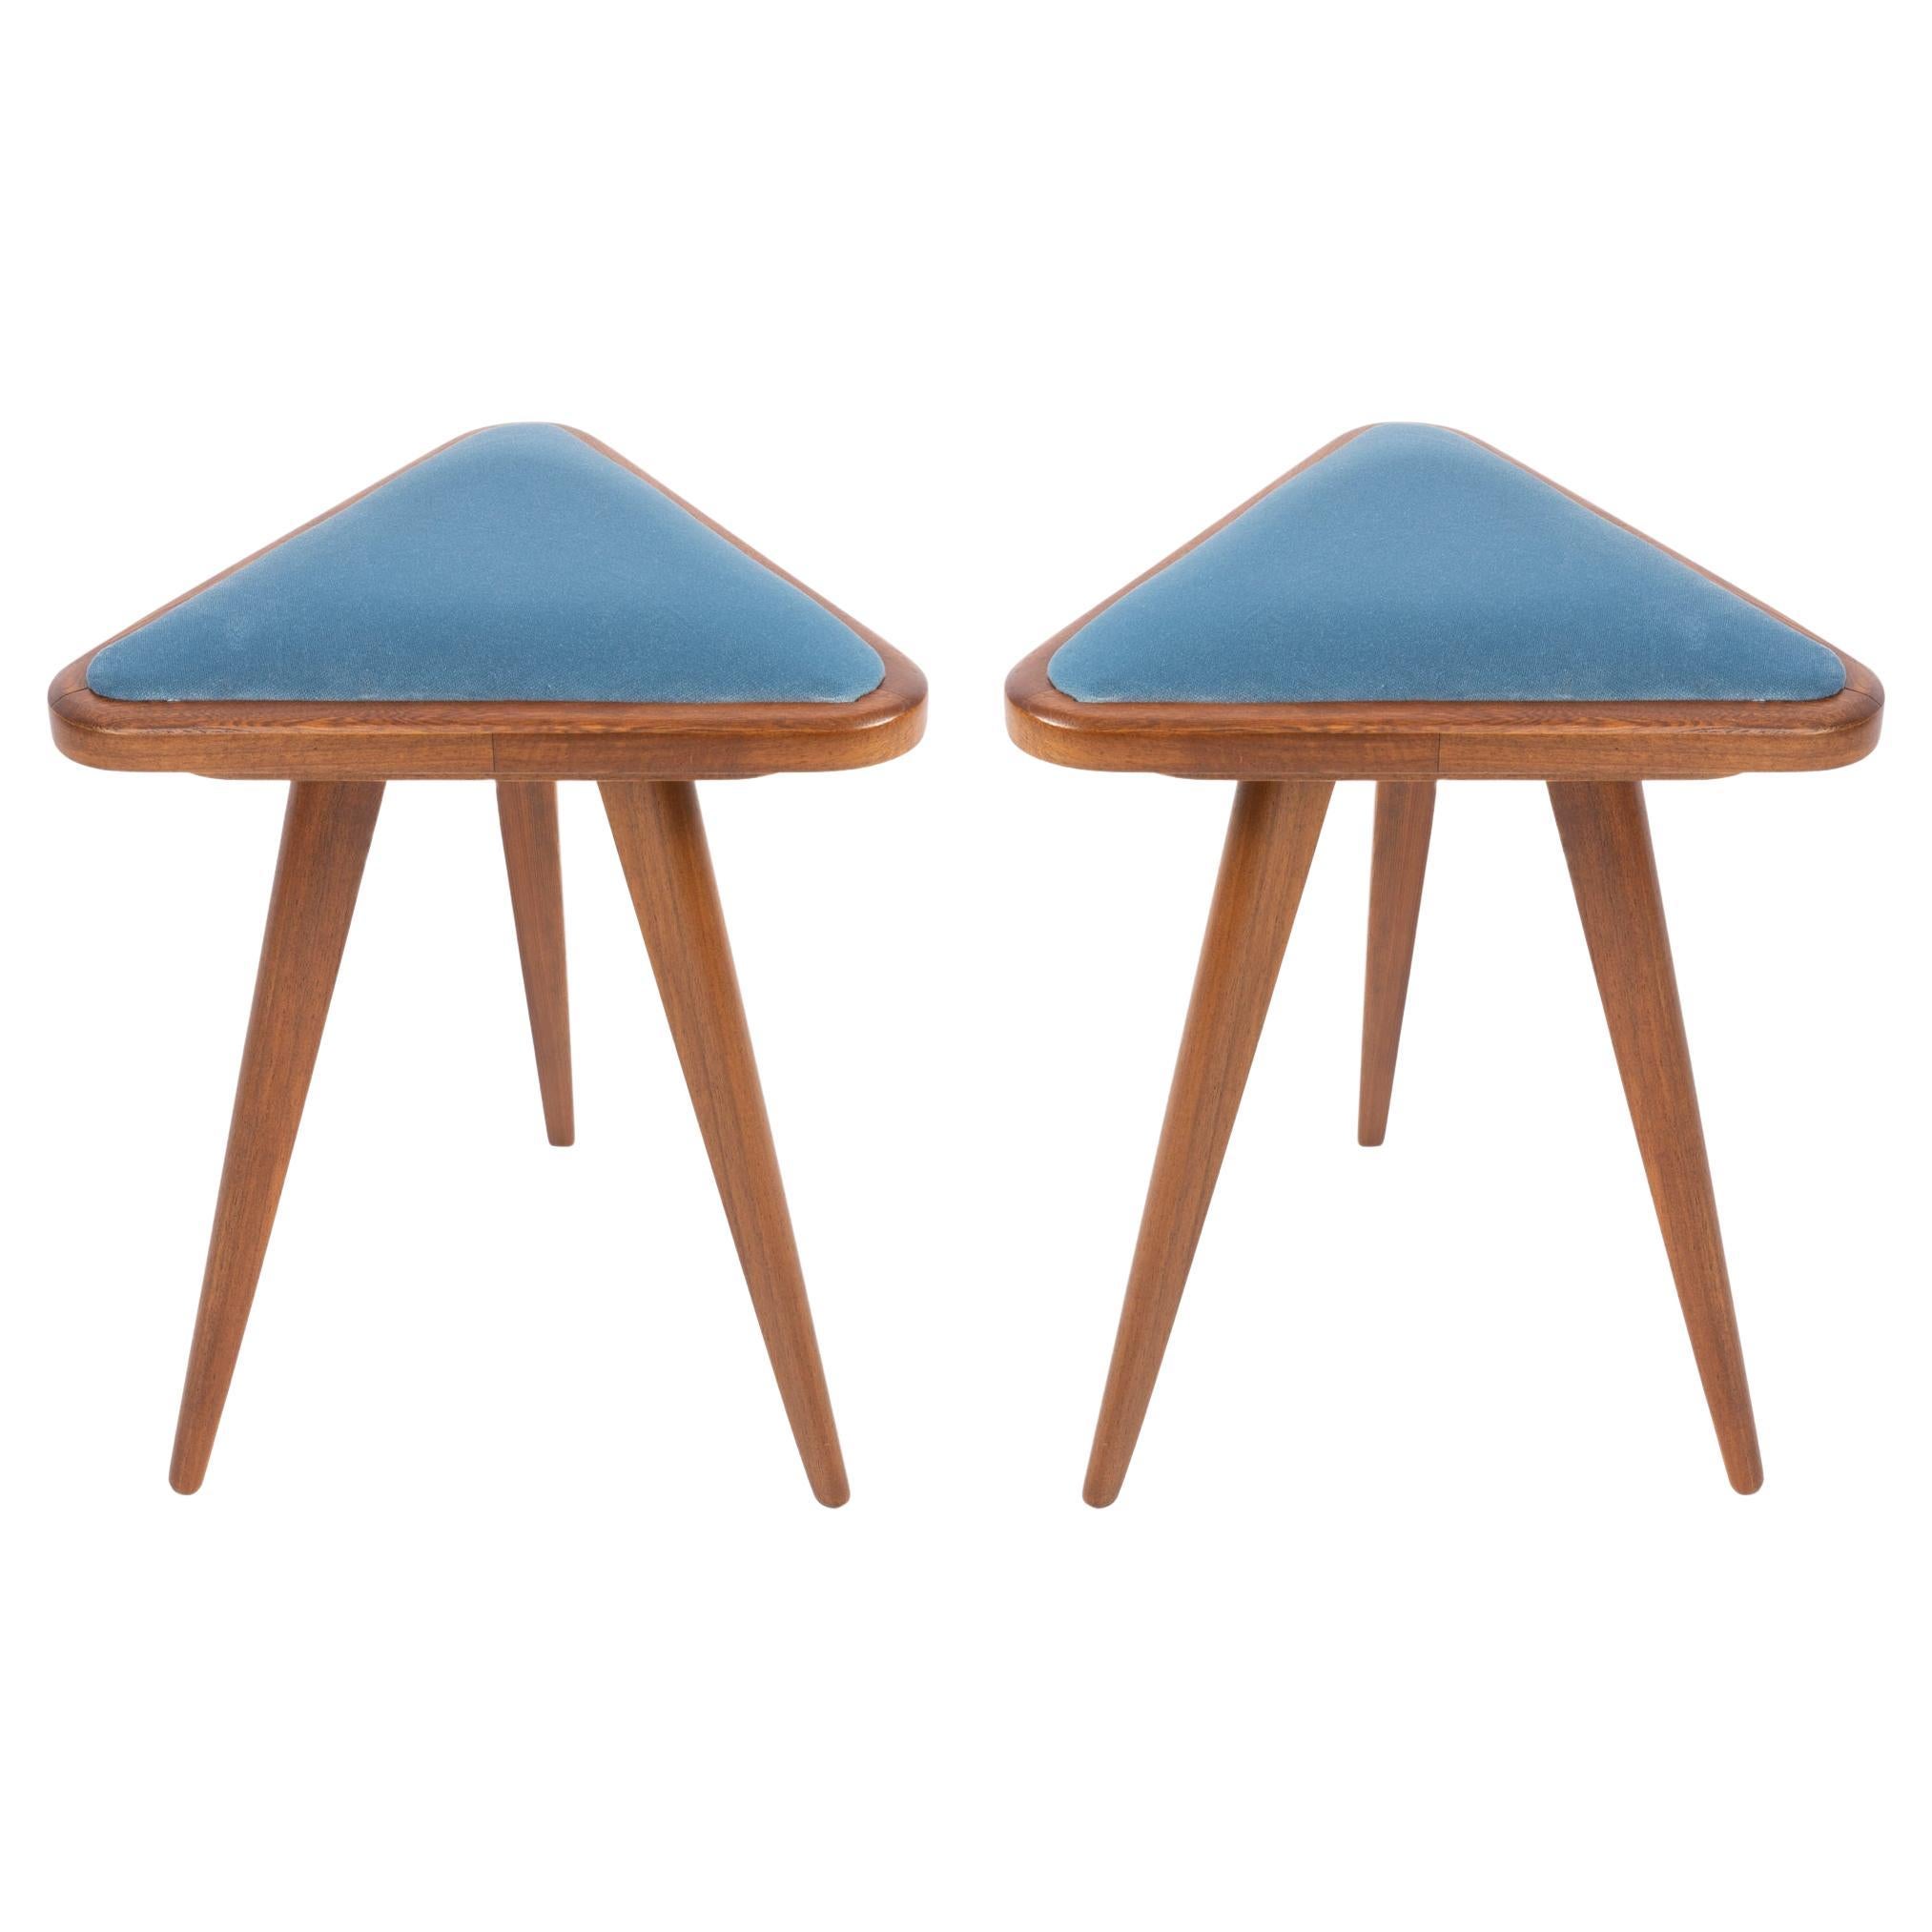 Set of Two Blue Velvet 20th Century Triangle Stools, Europe, 1960s For Sale